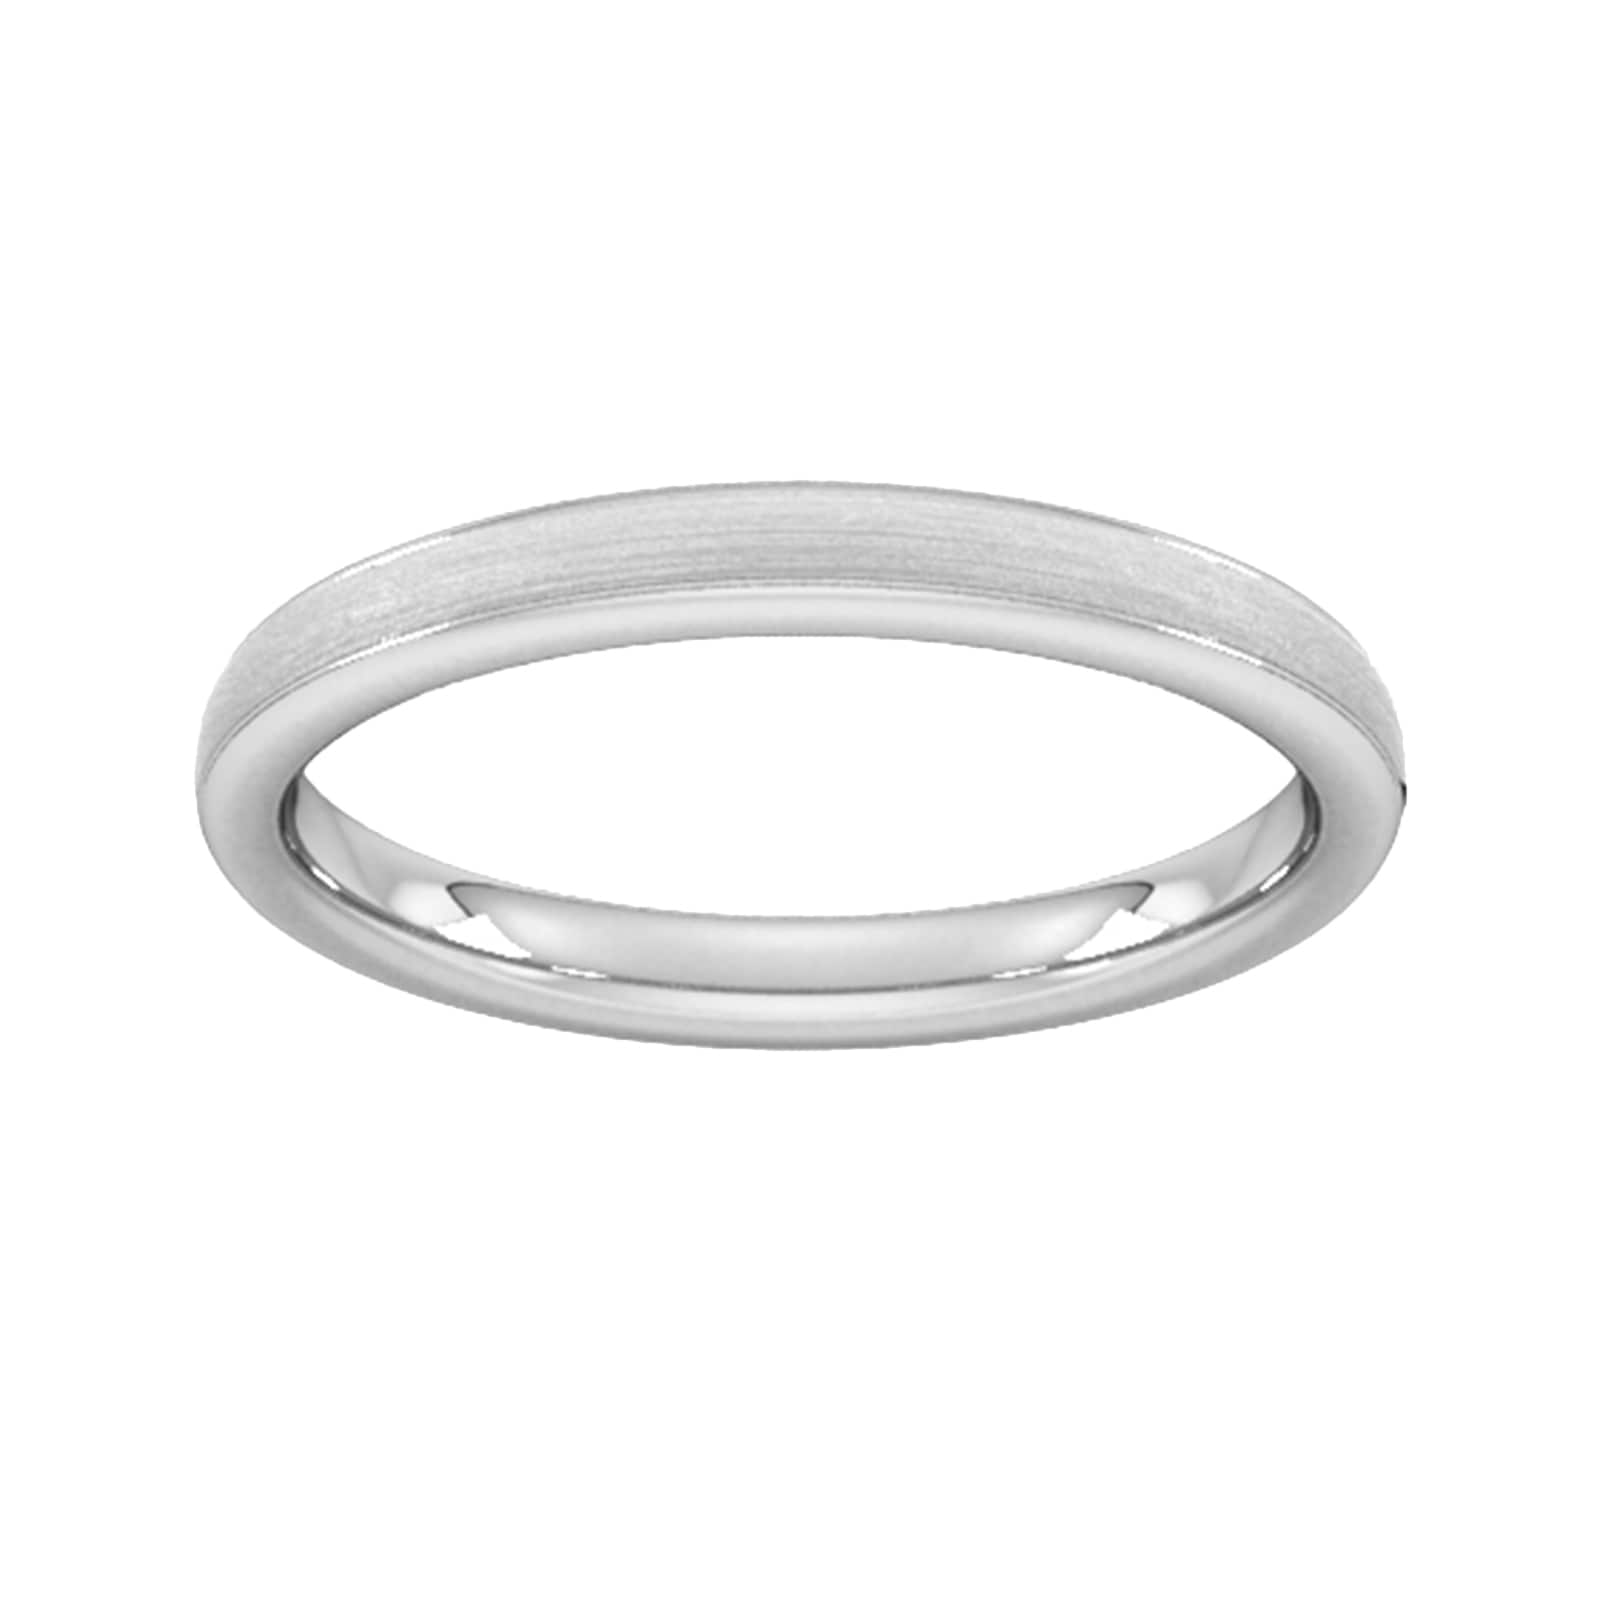 2.5mm Slight Court Extra Heavy Matt Centre With Grooves Wedding Ring In 18 Carat White Gold - Ring Size H